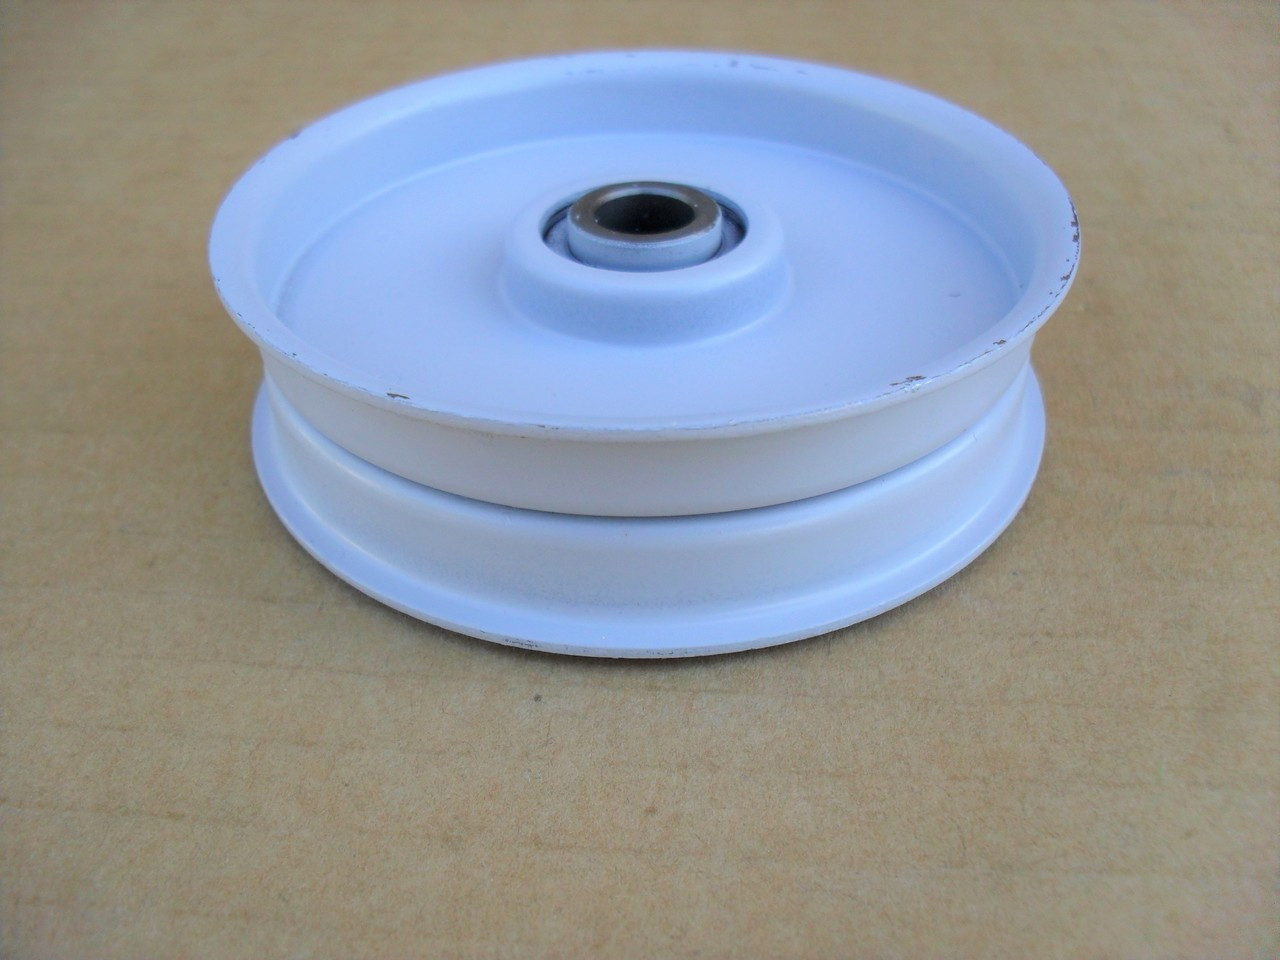 Idler Pulley for Ariens LT832, 07312700 ID:3/8" OD:3-1/4" Height:7/8"